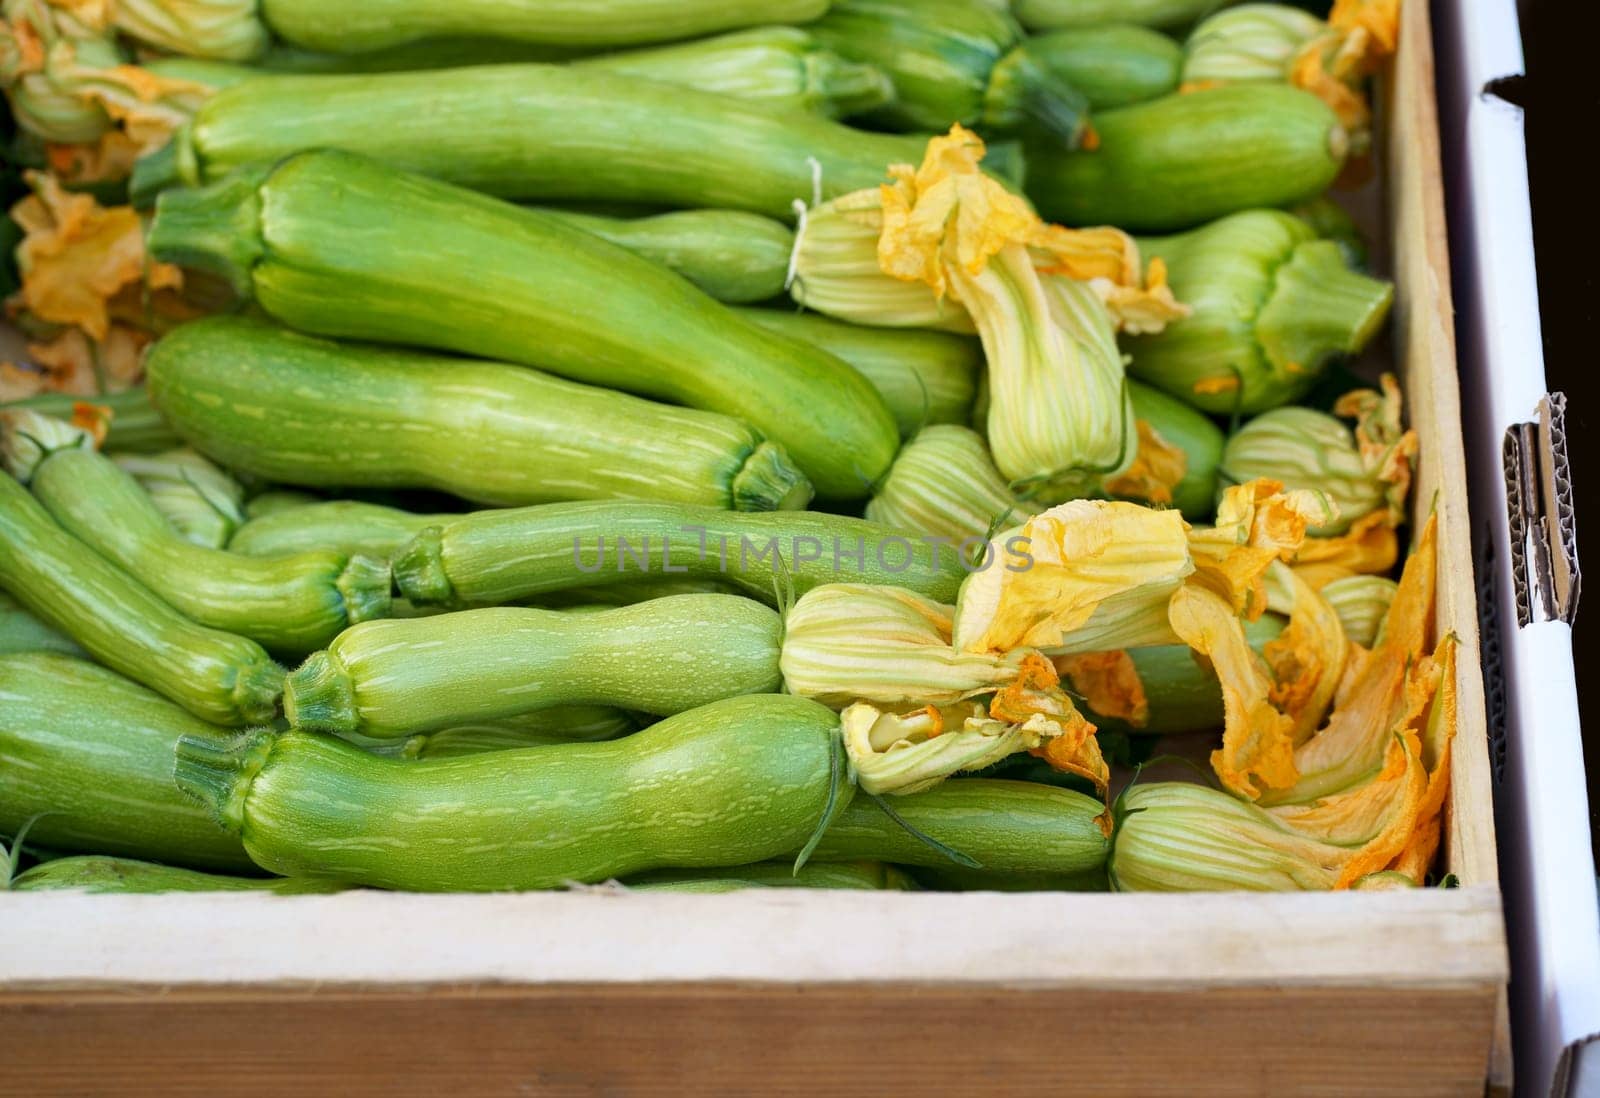 Nice. French market. Fresh zucchini with flowers sold at the market. Zucchini flowers are used in traditional French cuisine by aprilphoto